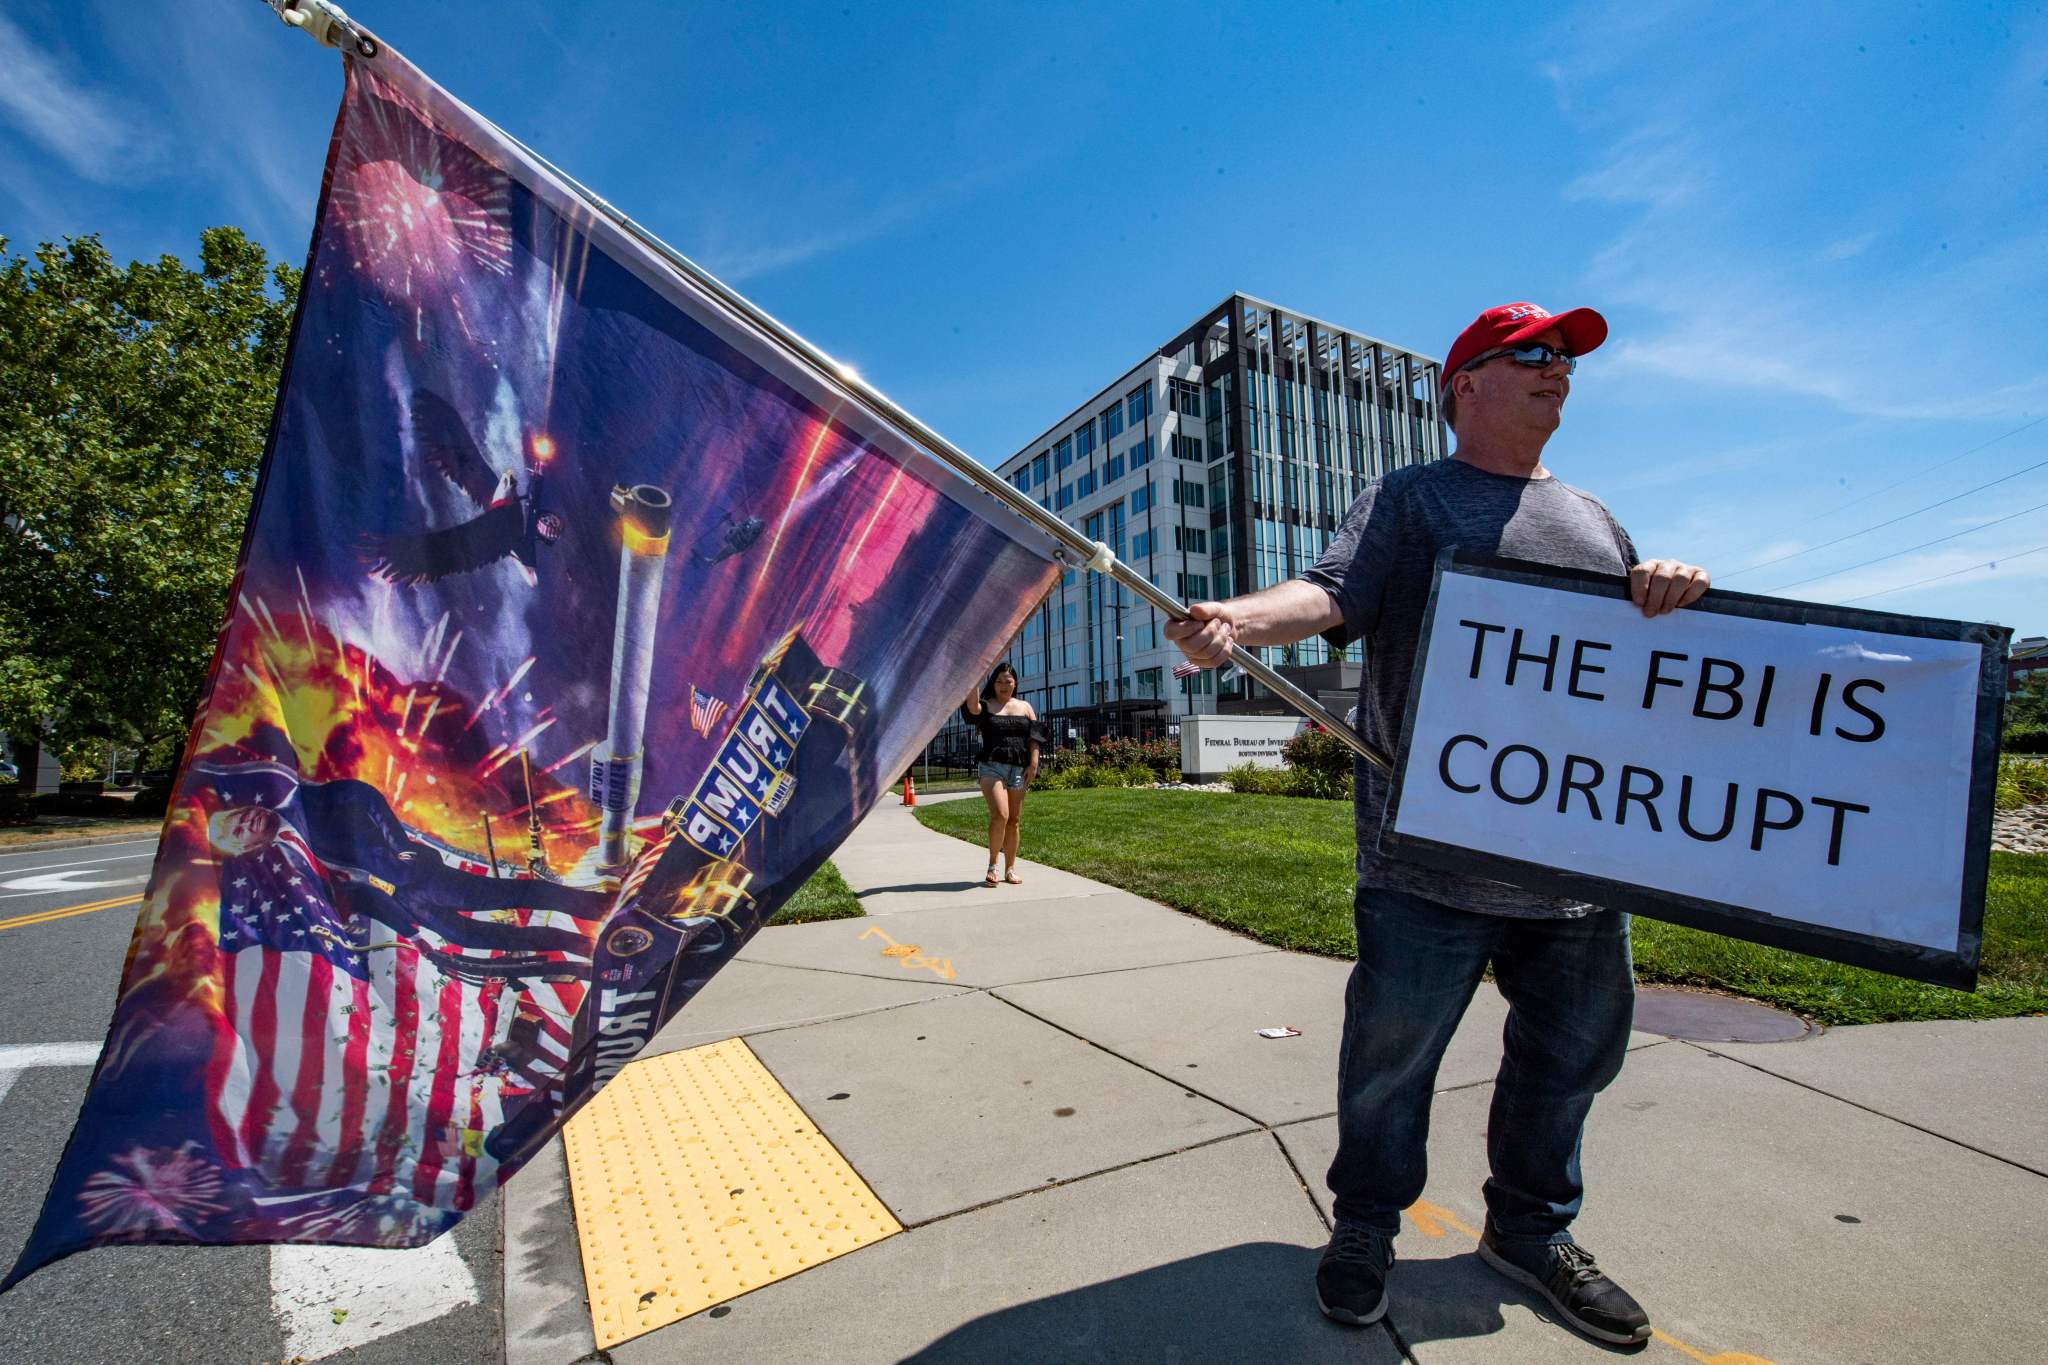 Demonstrators protest the recent actions of the FBI at their Boston headquarters in Chelsea, Massachusetts, on August 21, 2022. (Photo by JOSEPH PREZIOSO/AFP via Getty Images)